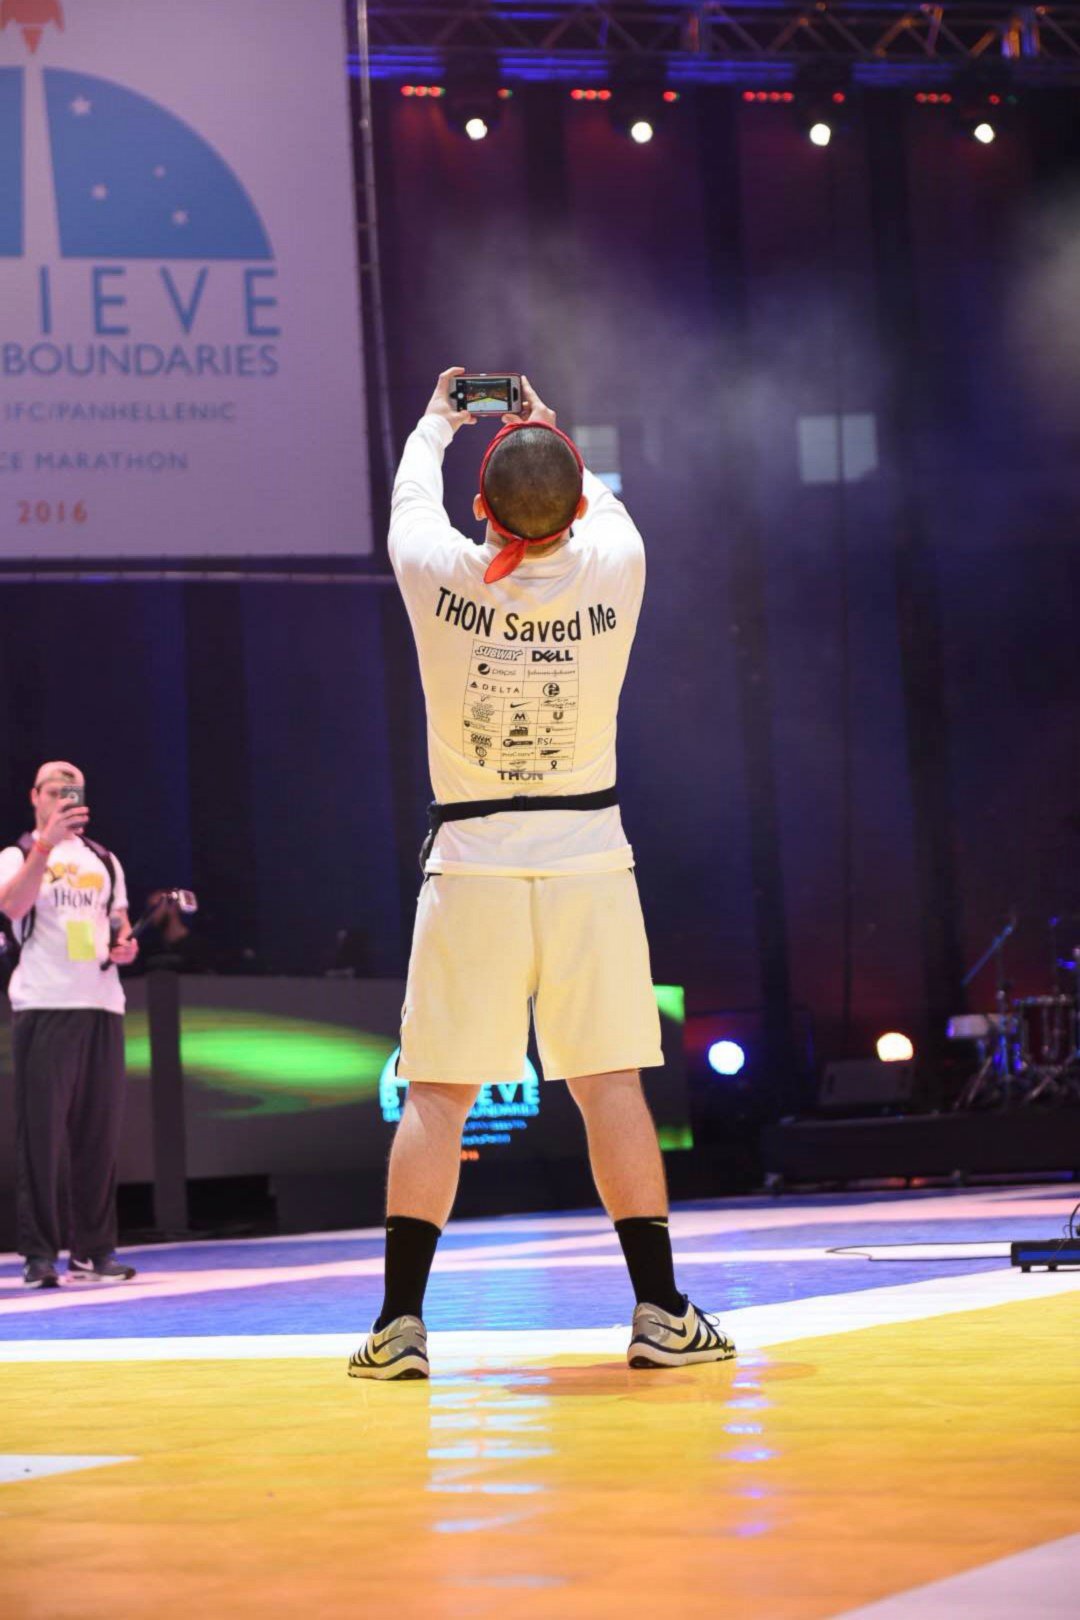 PHOTO: Brady Lucas snaps a photo at Penn State University's THON, which raises money for pediatric cancer patients.